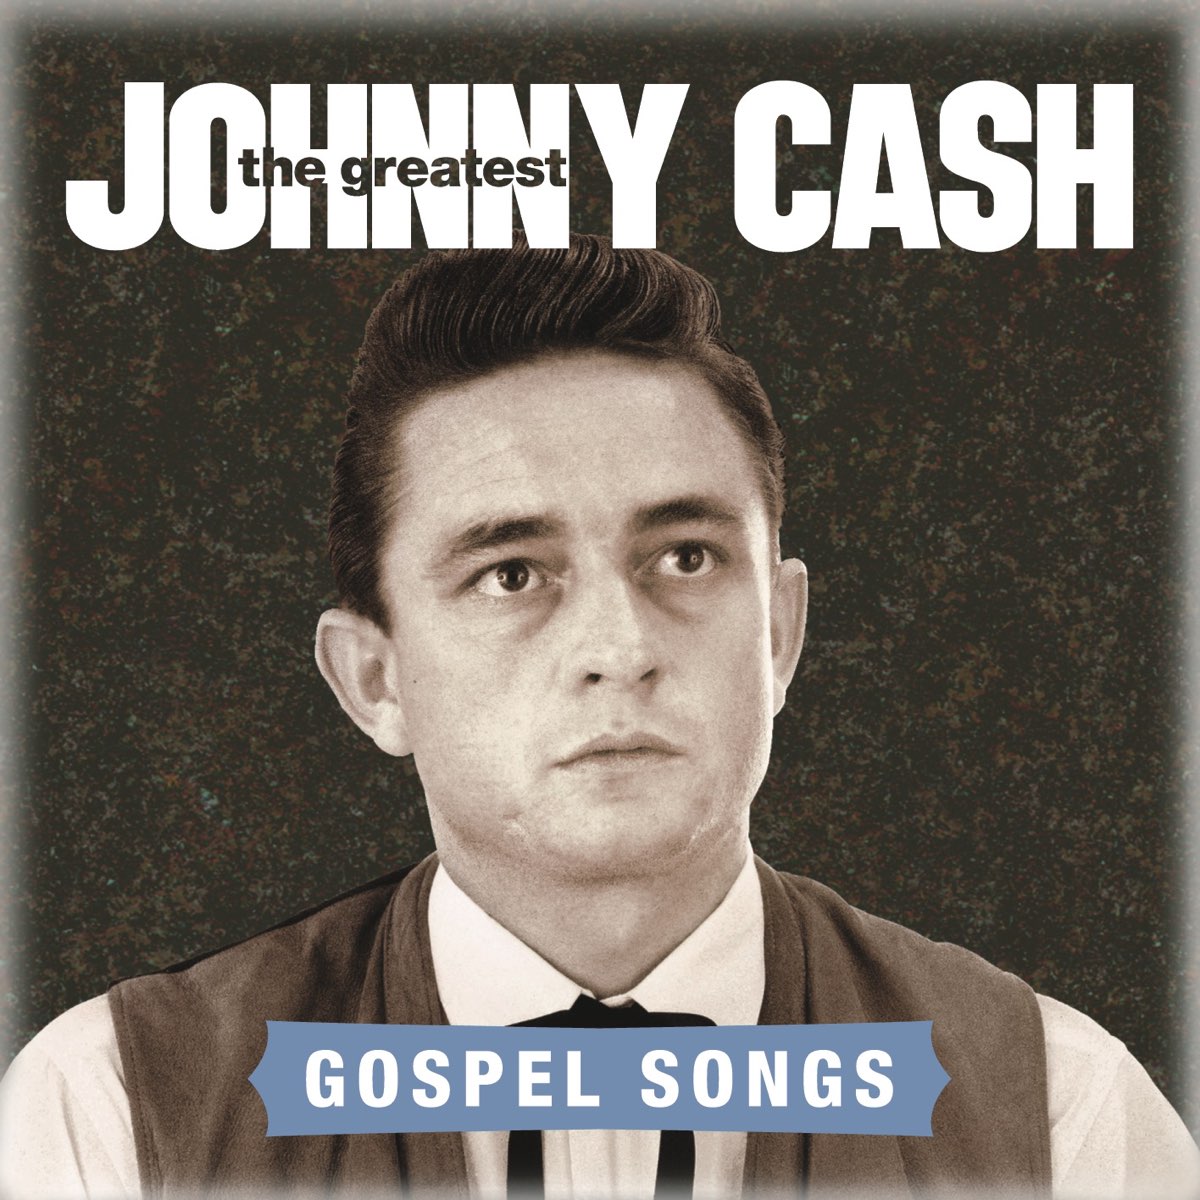 Johnny Cash Now, there was a Song!. Hell s greatest dad sing